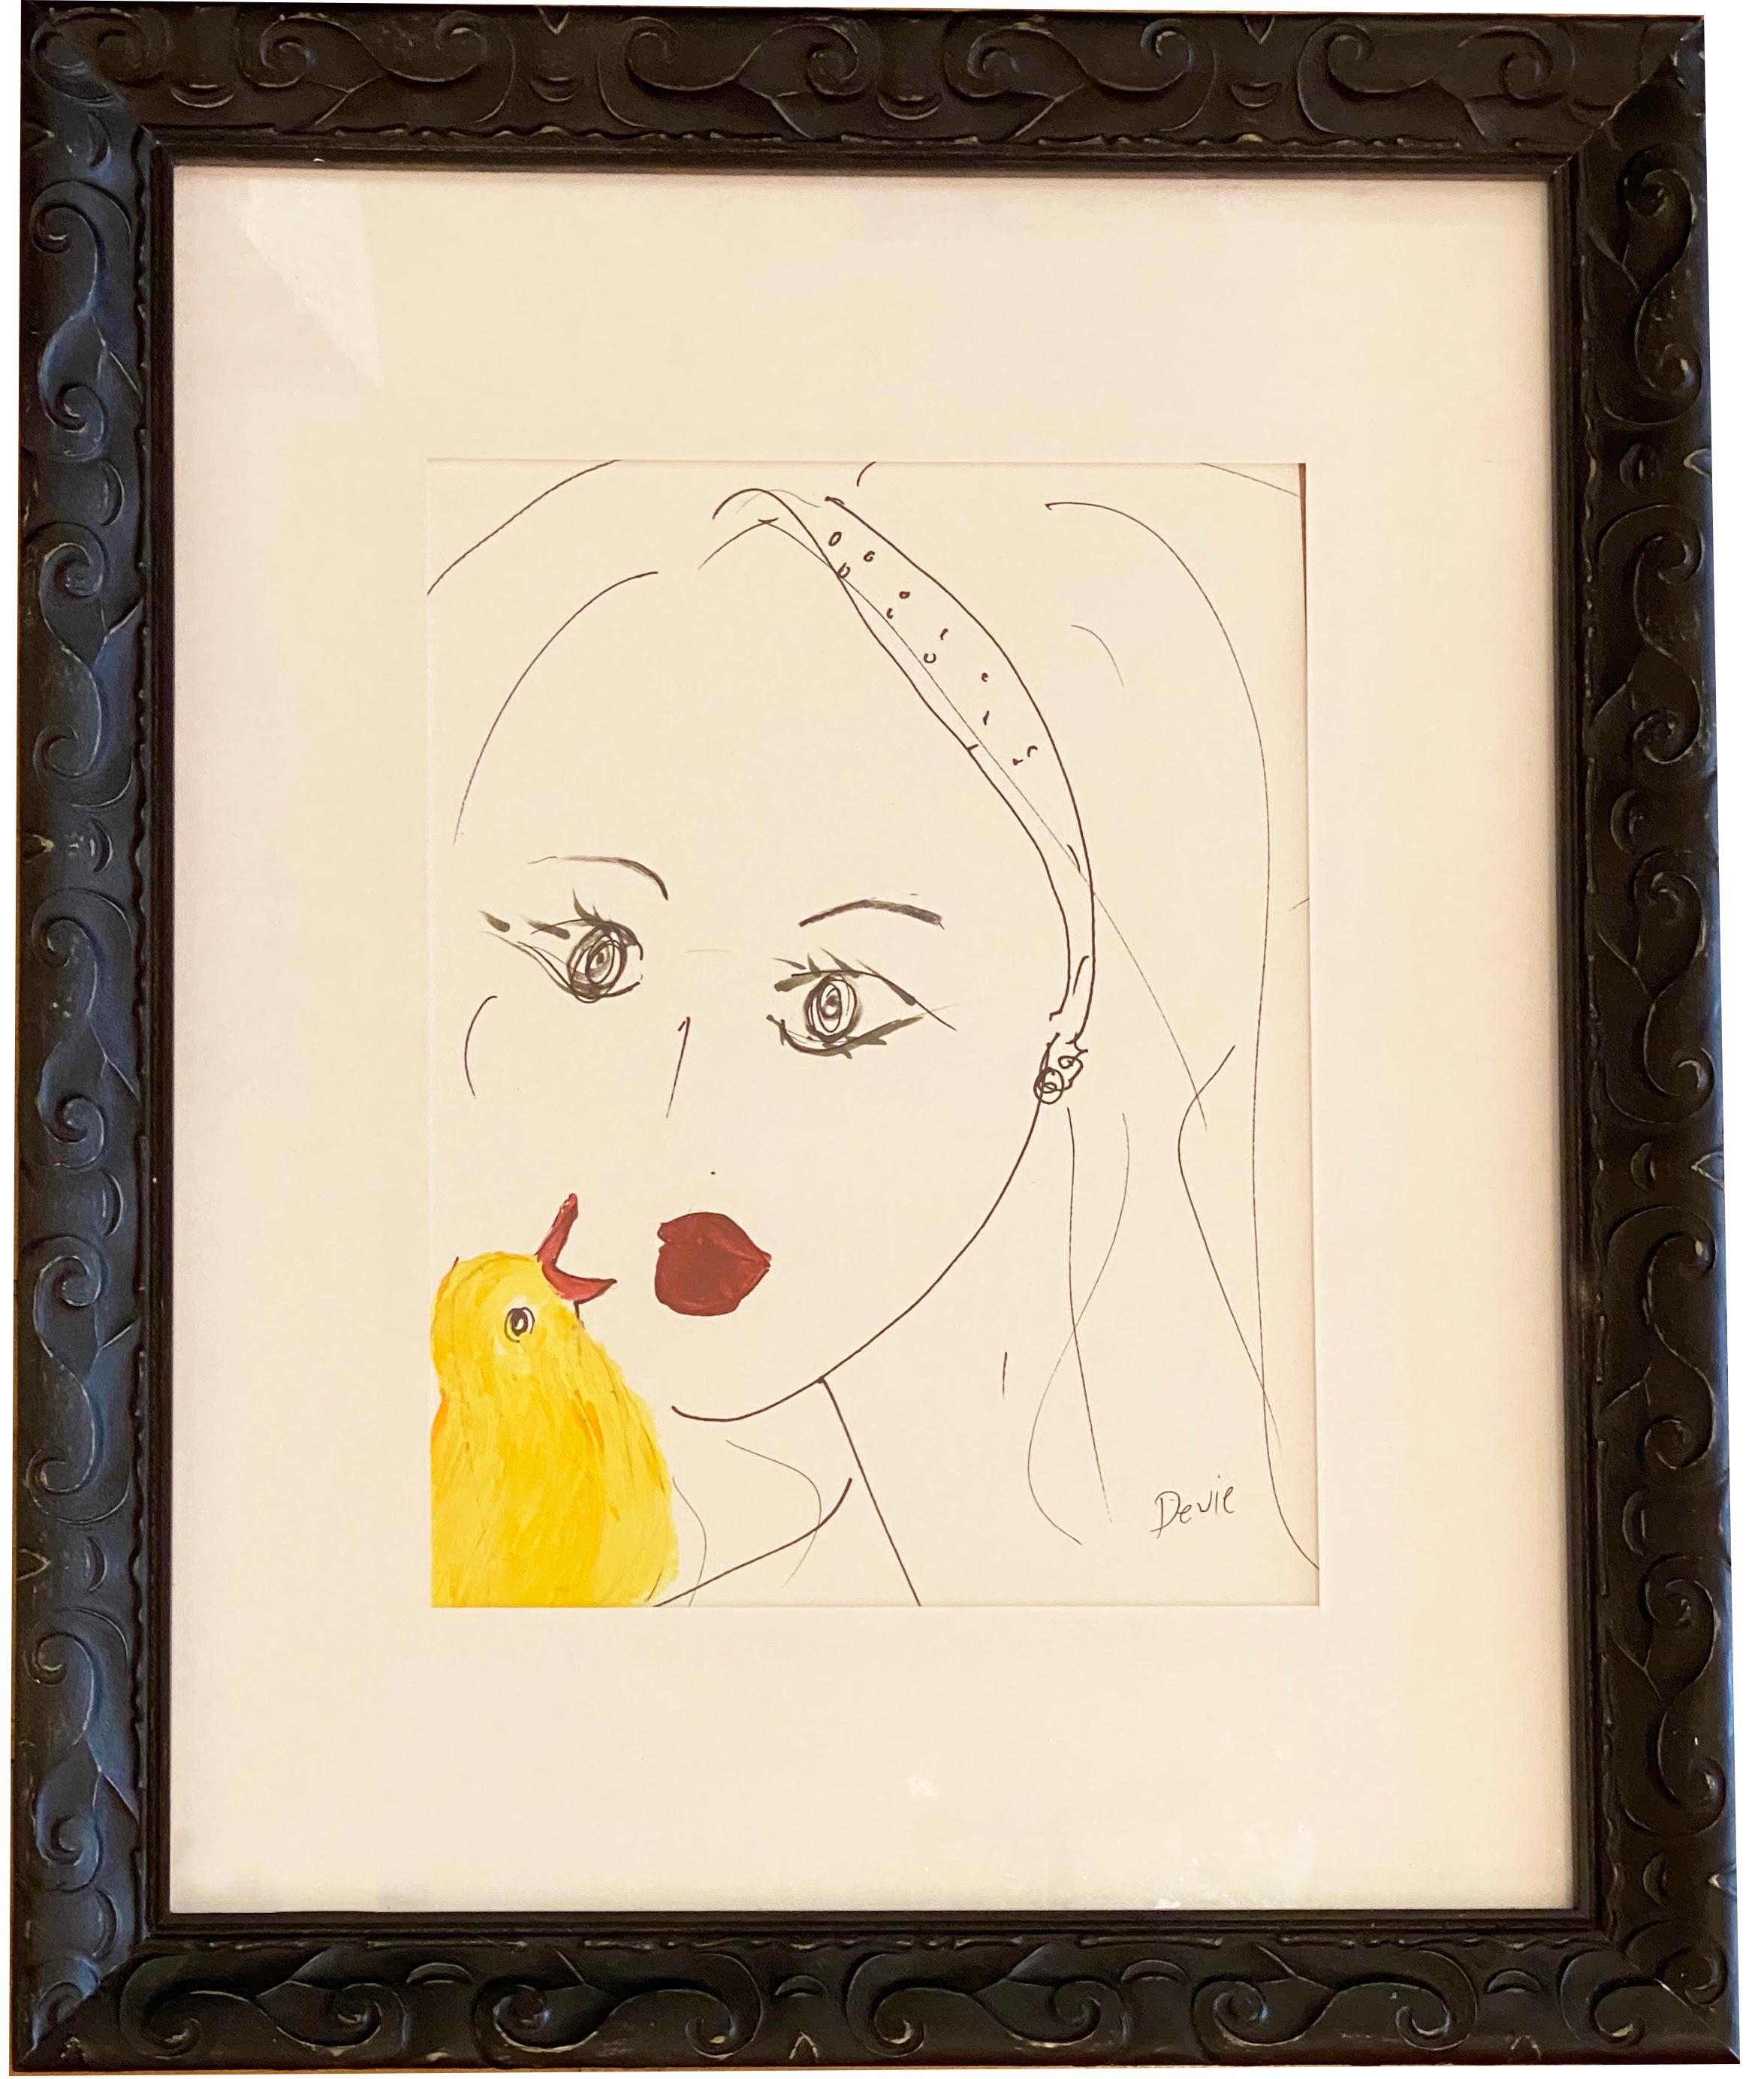 'Young Women & Bird ' original Drawing Acrylic And Ink On Paper  By Devie  - Art by Devie Elzafon